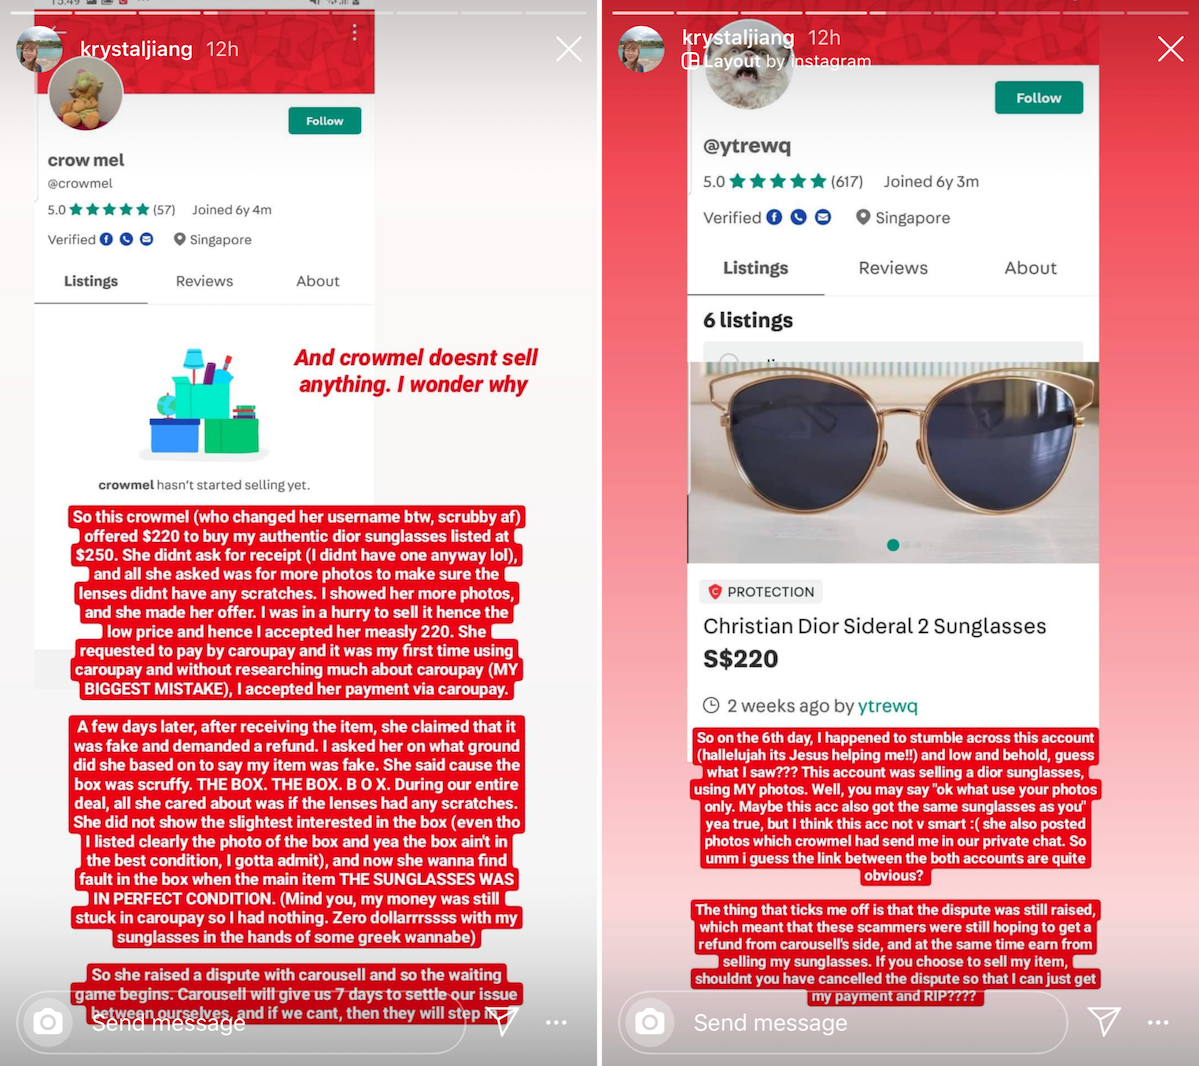 common scams in Singapore - Carousell scams using Caroupay to refund payment.